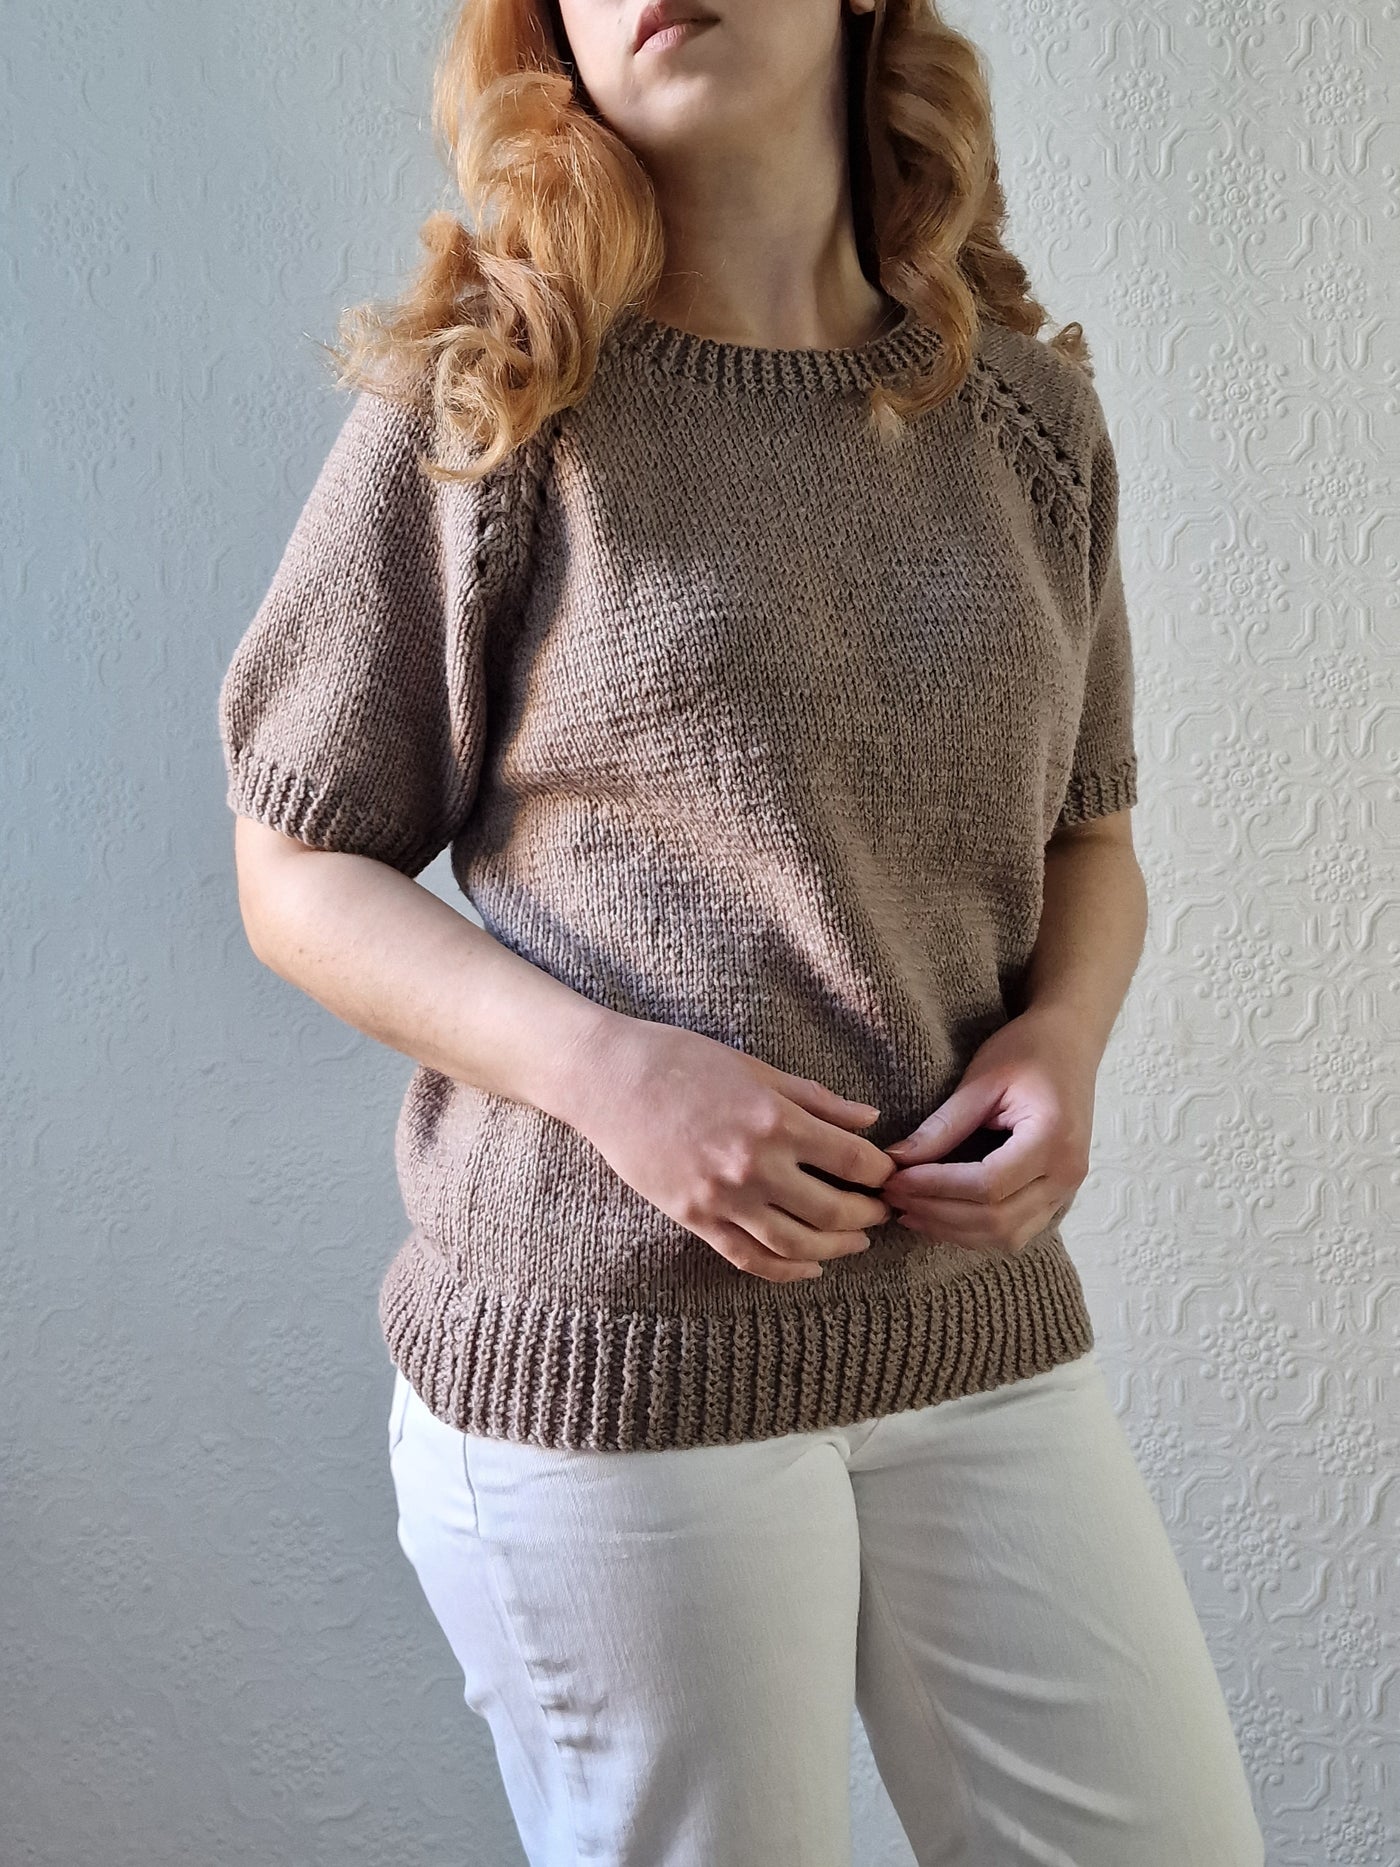 Vintage 80s Light Brown Round Neck Handknitted Jumper Top with Short Sleeves - S/M